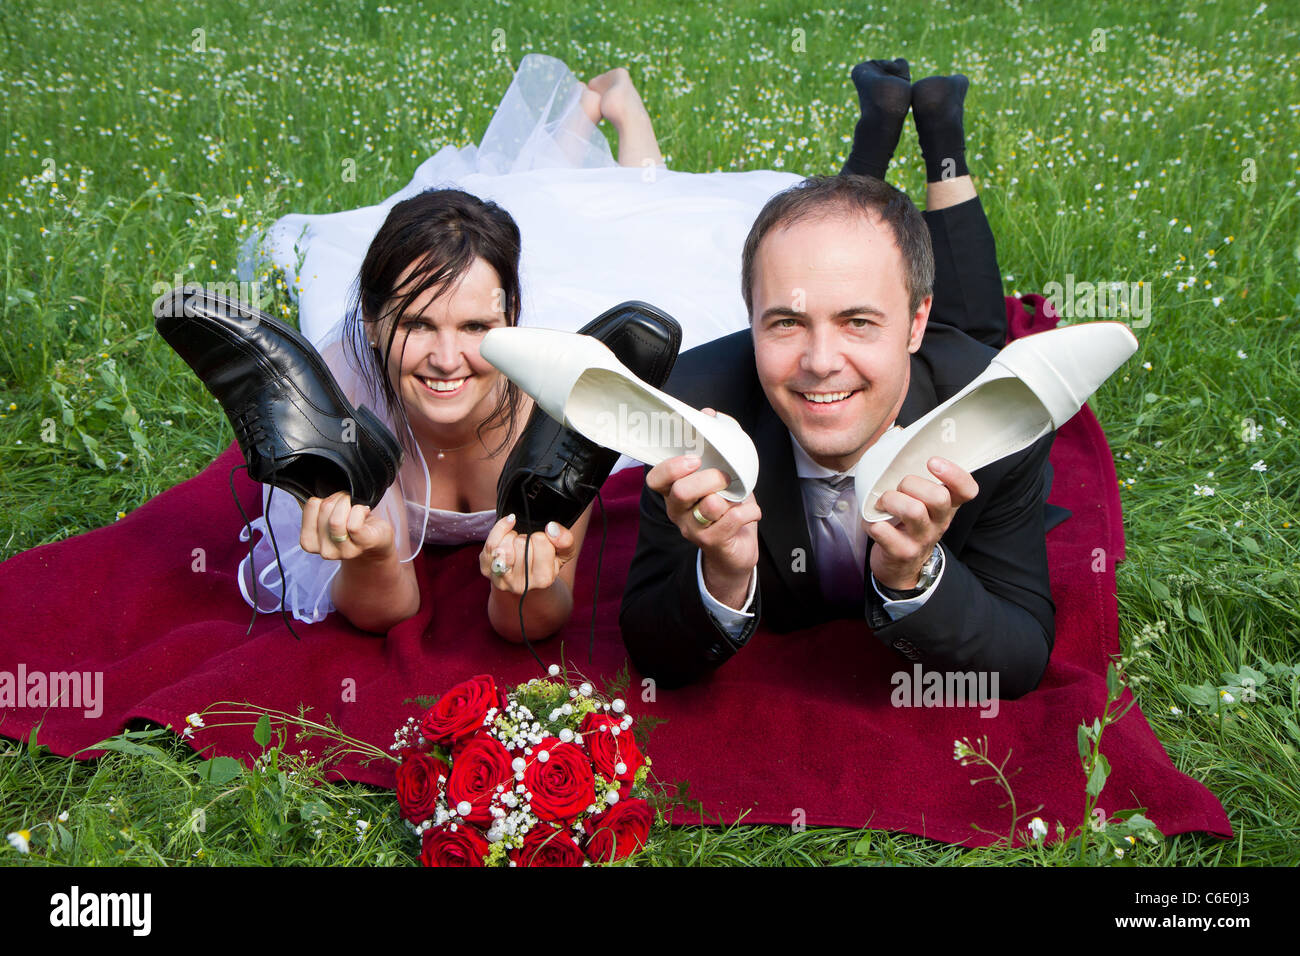 newly wed couple with wedding gown dark suit and red bridal bouquet the groom and bride lie on a meadow having fun Stock Photo